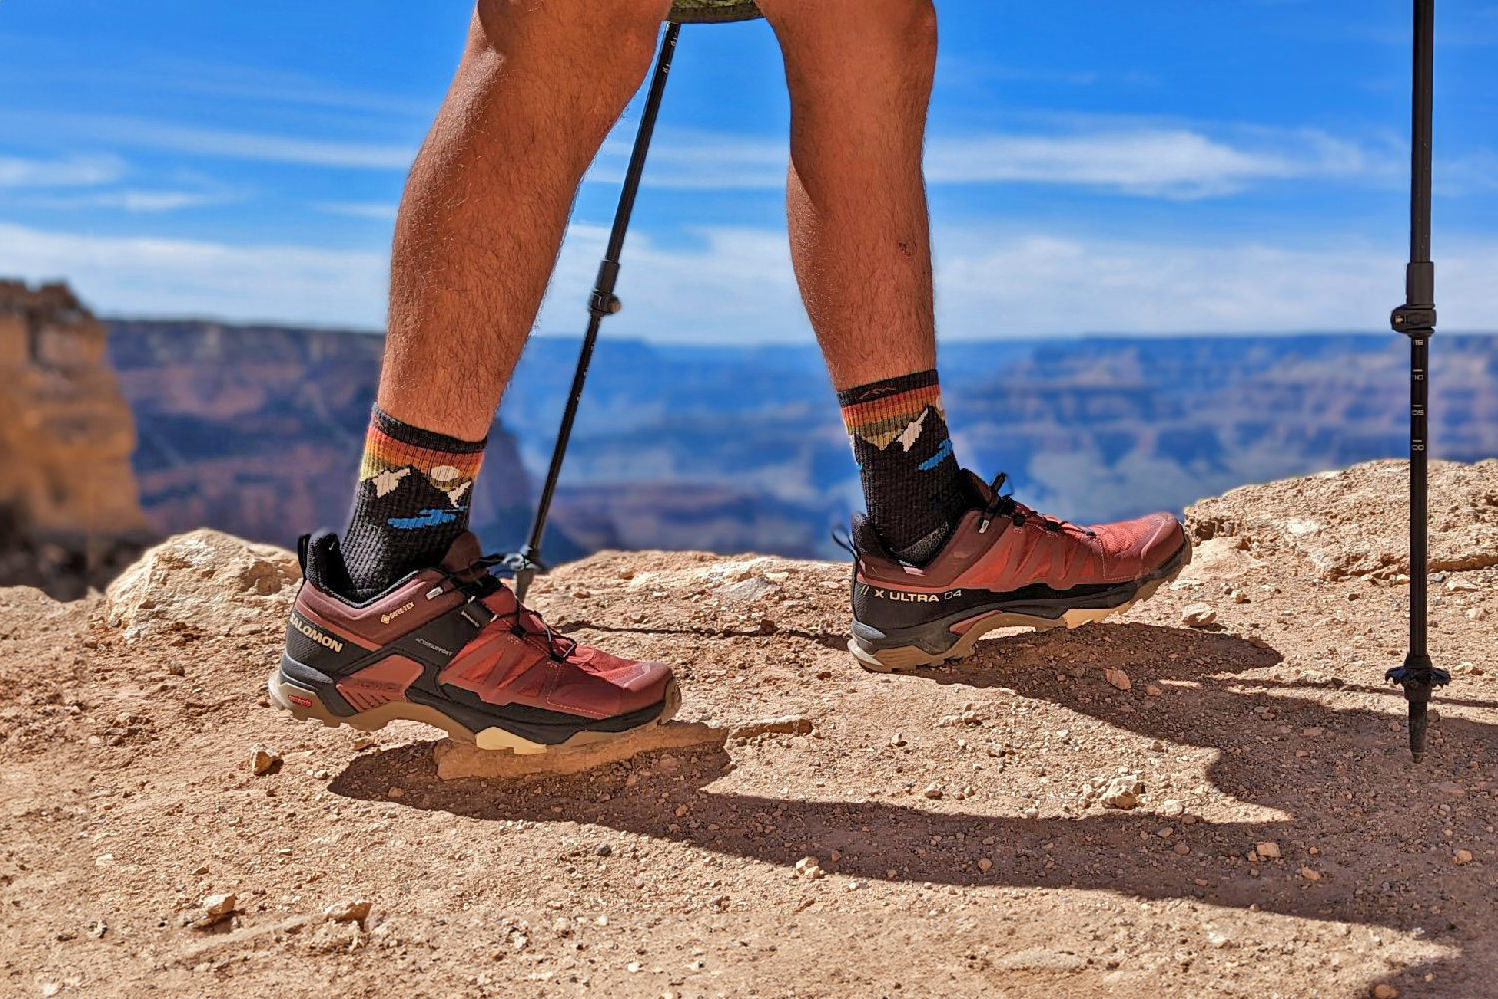 Closeup of a hiker's feet in the Darn Tough Light Hiker Micro Crew socks and Salomon X Ultra shoes on the rim of the Grand Canyon